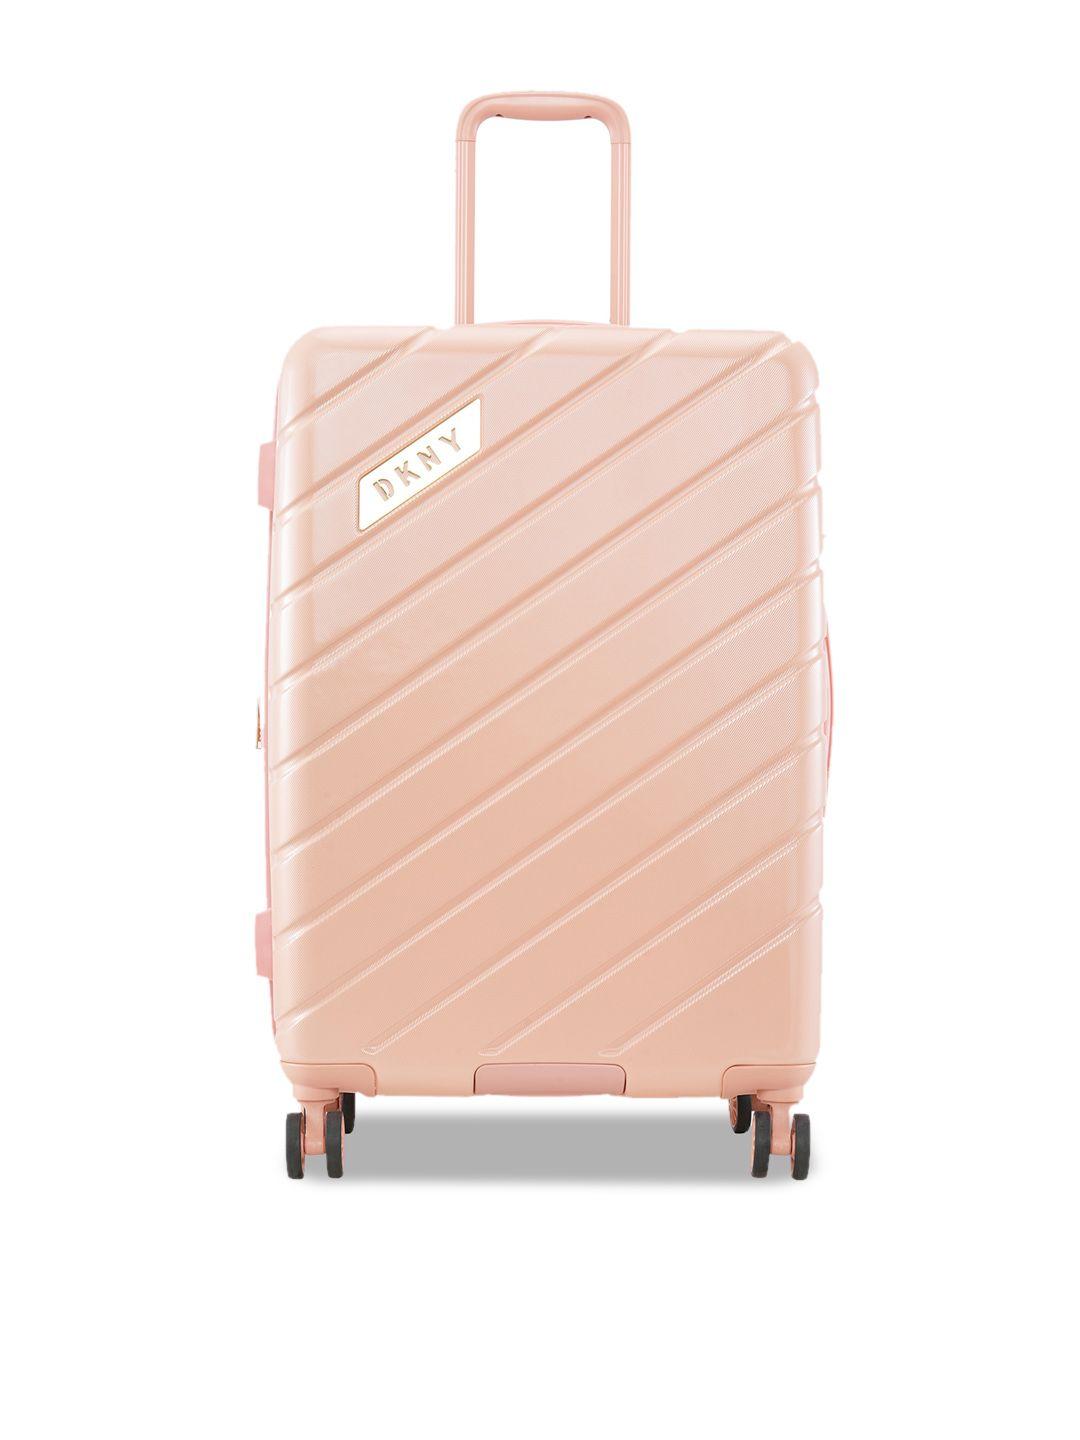 dkny bias textured abs material hard-sided medium trolley suitcase